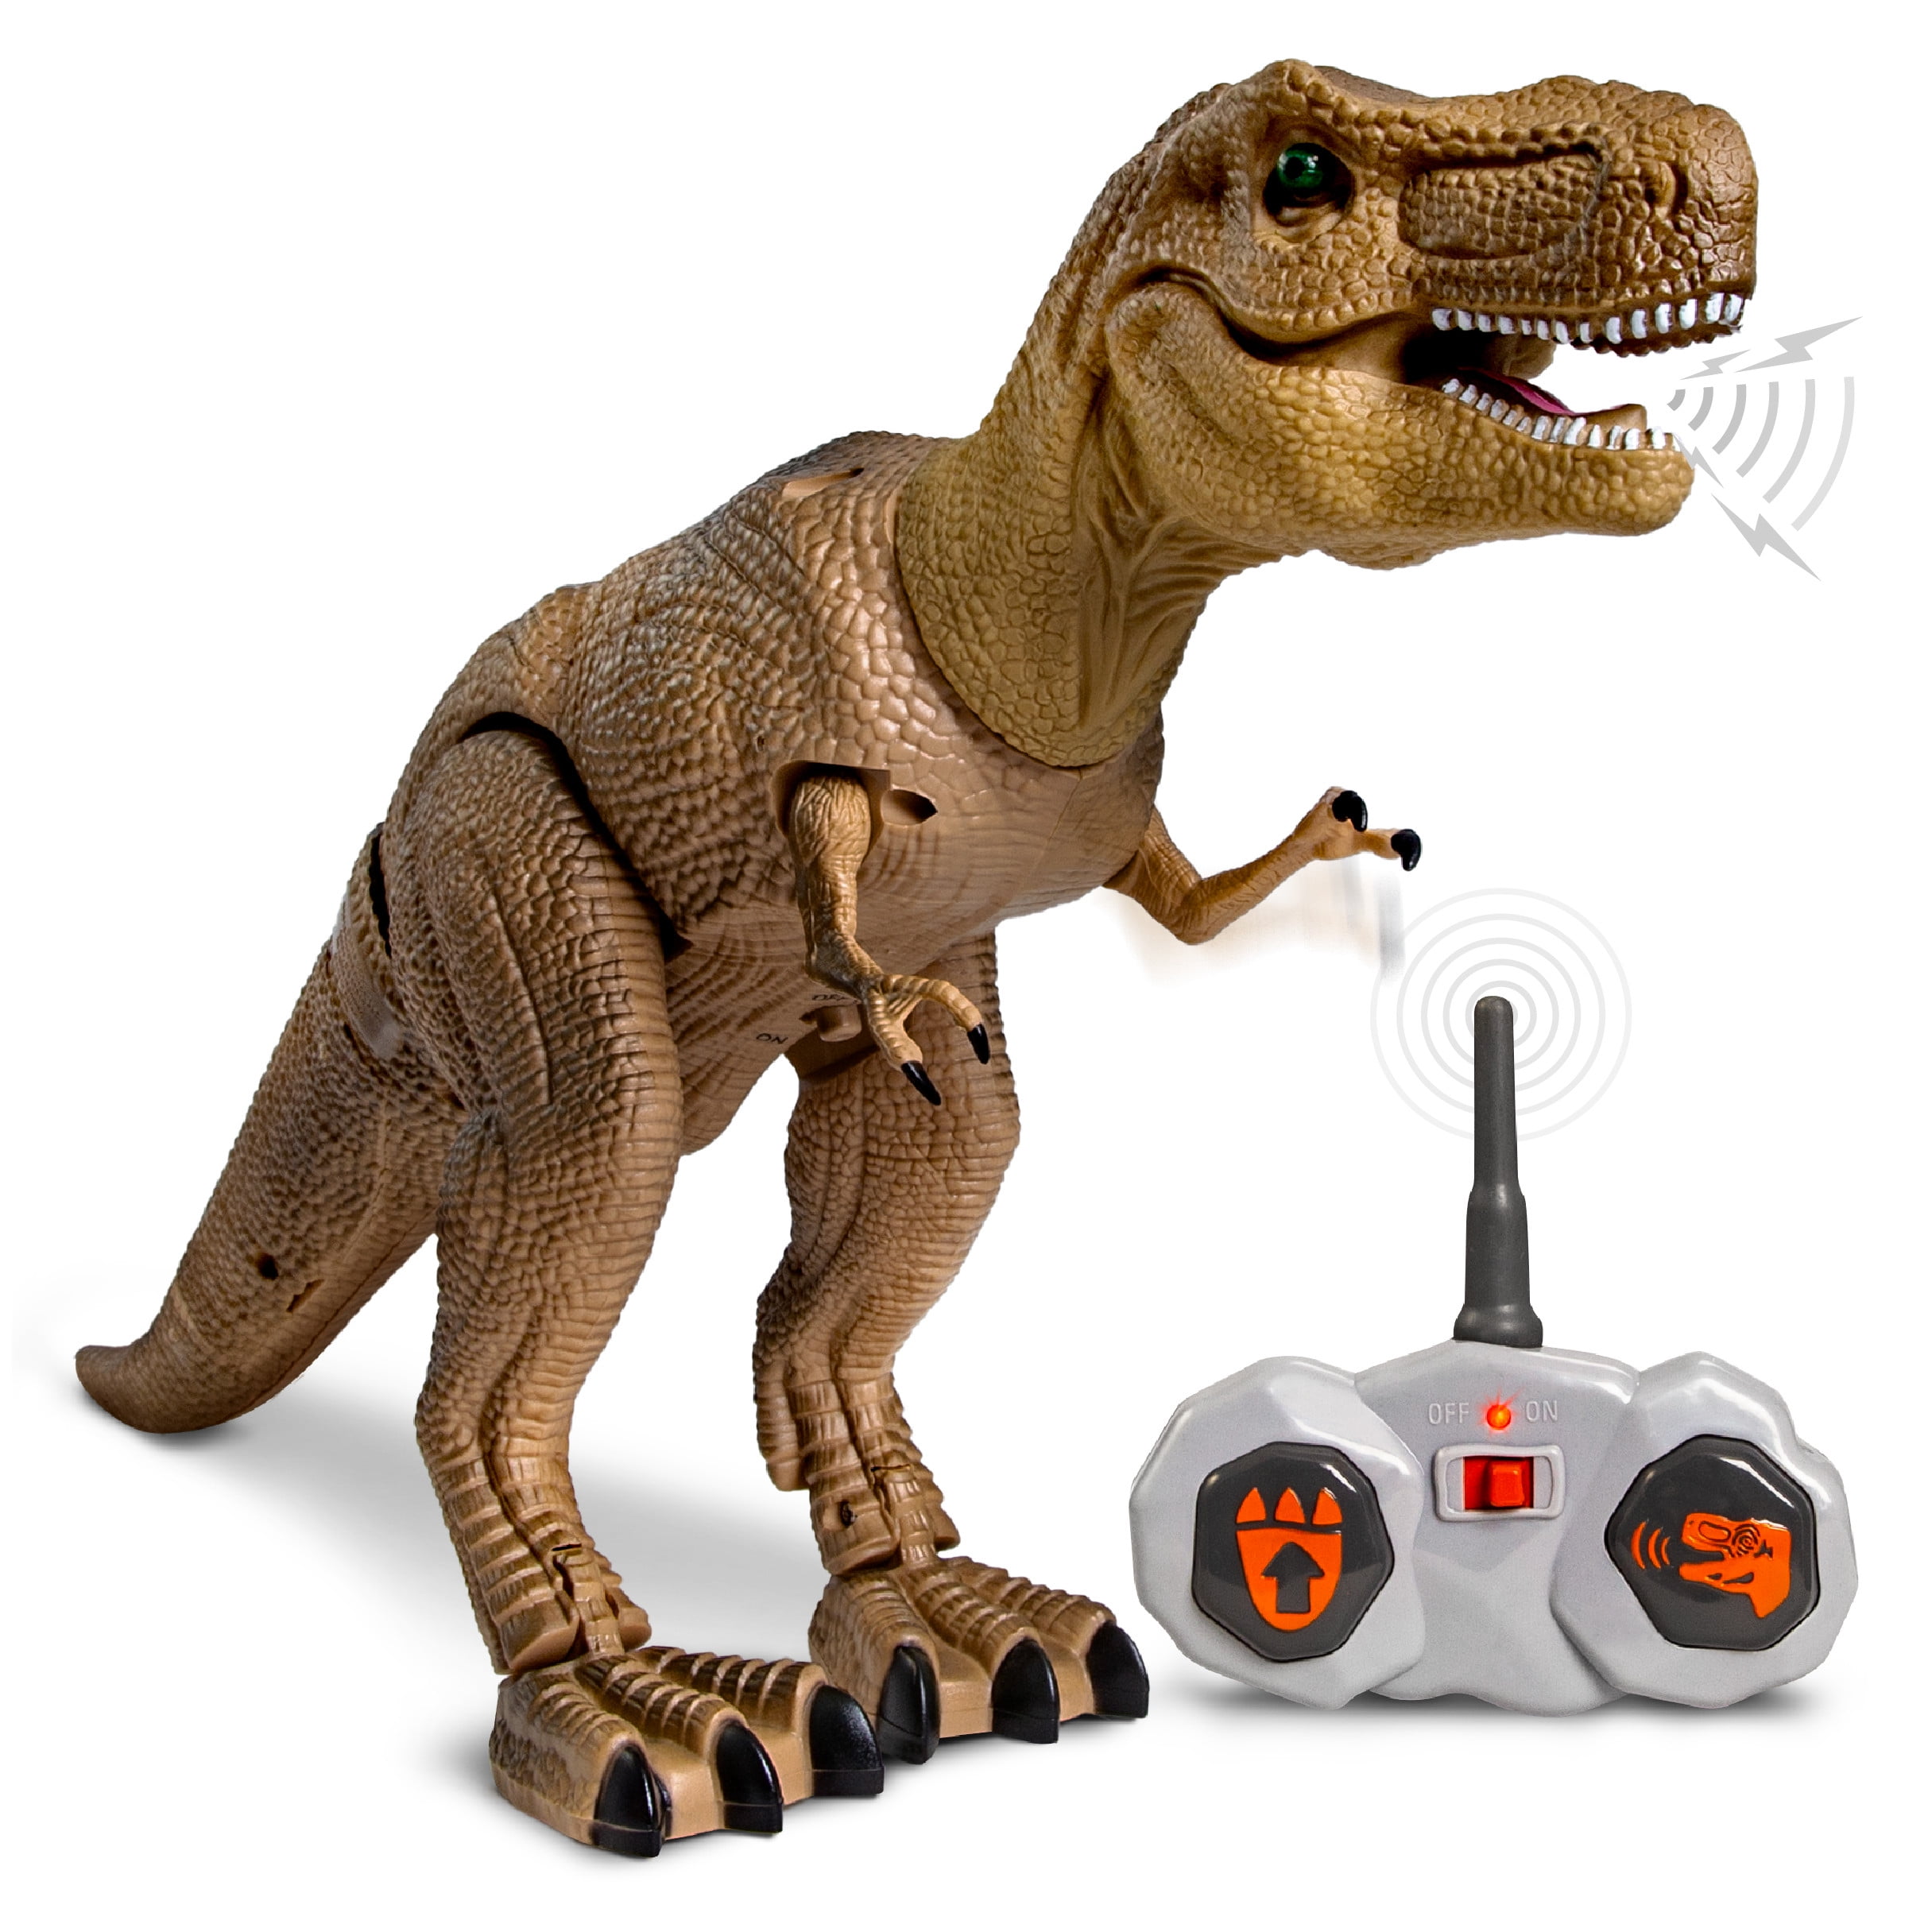 Discovery Kids Remote Control RC T Rex Electronic Toy Figure Moving & Walking Robot w/ Roaring Sounds & Chomping Mouth, Realistic Plastic Model, Girls 6 Years Old+ -